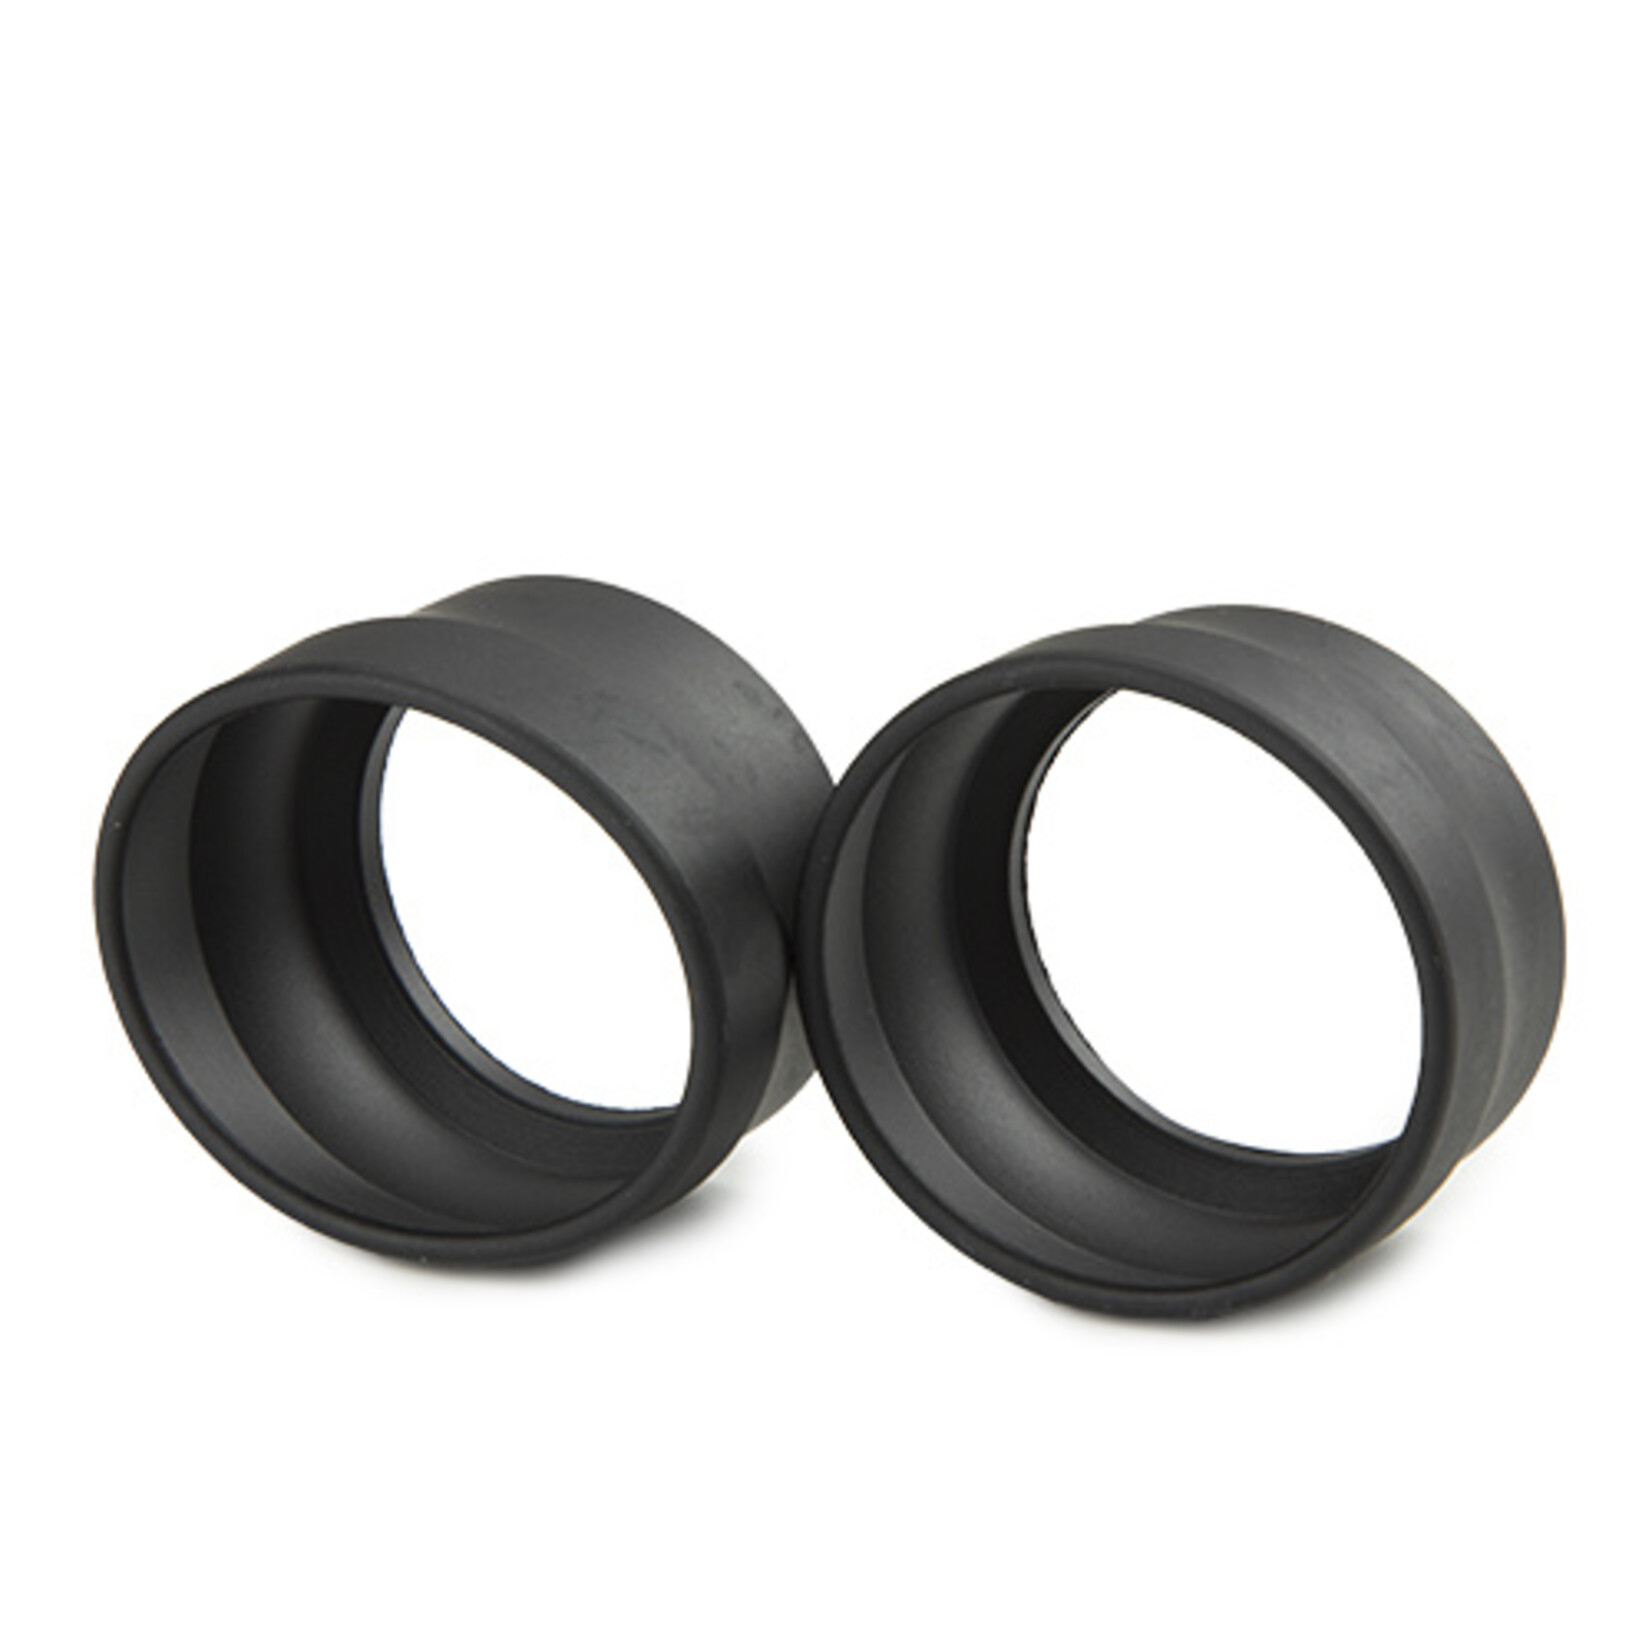 Eye cups for Oxion Inverso